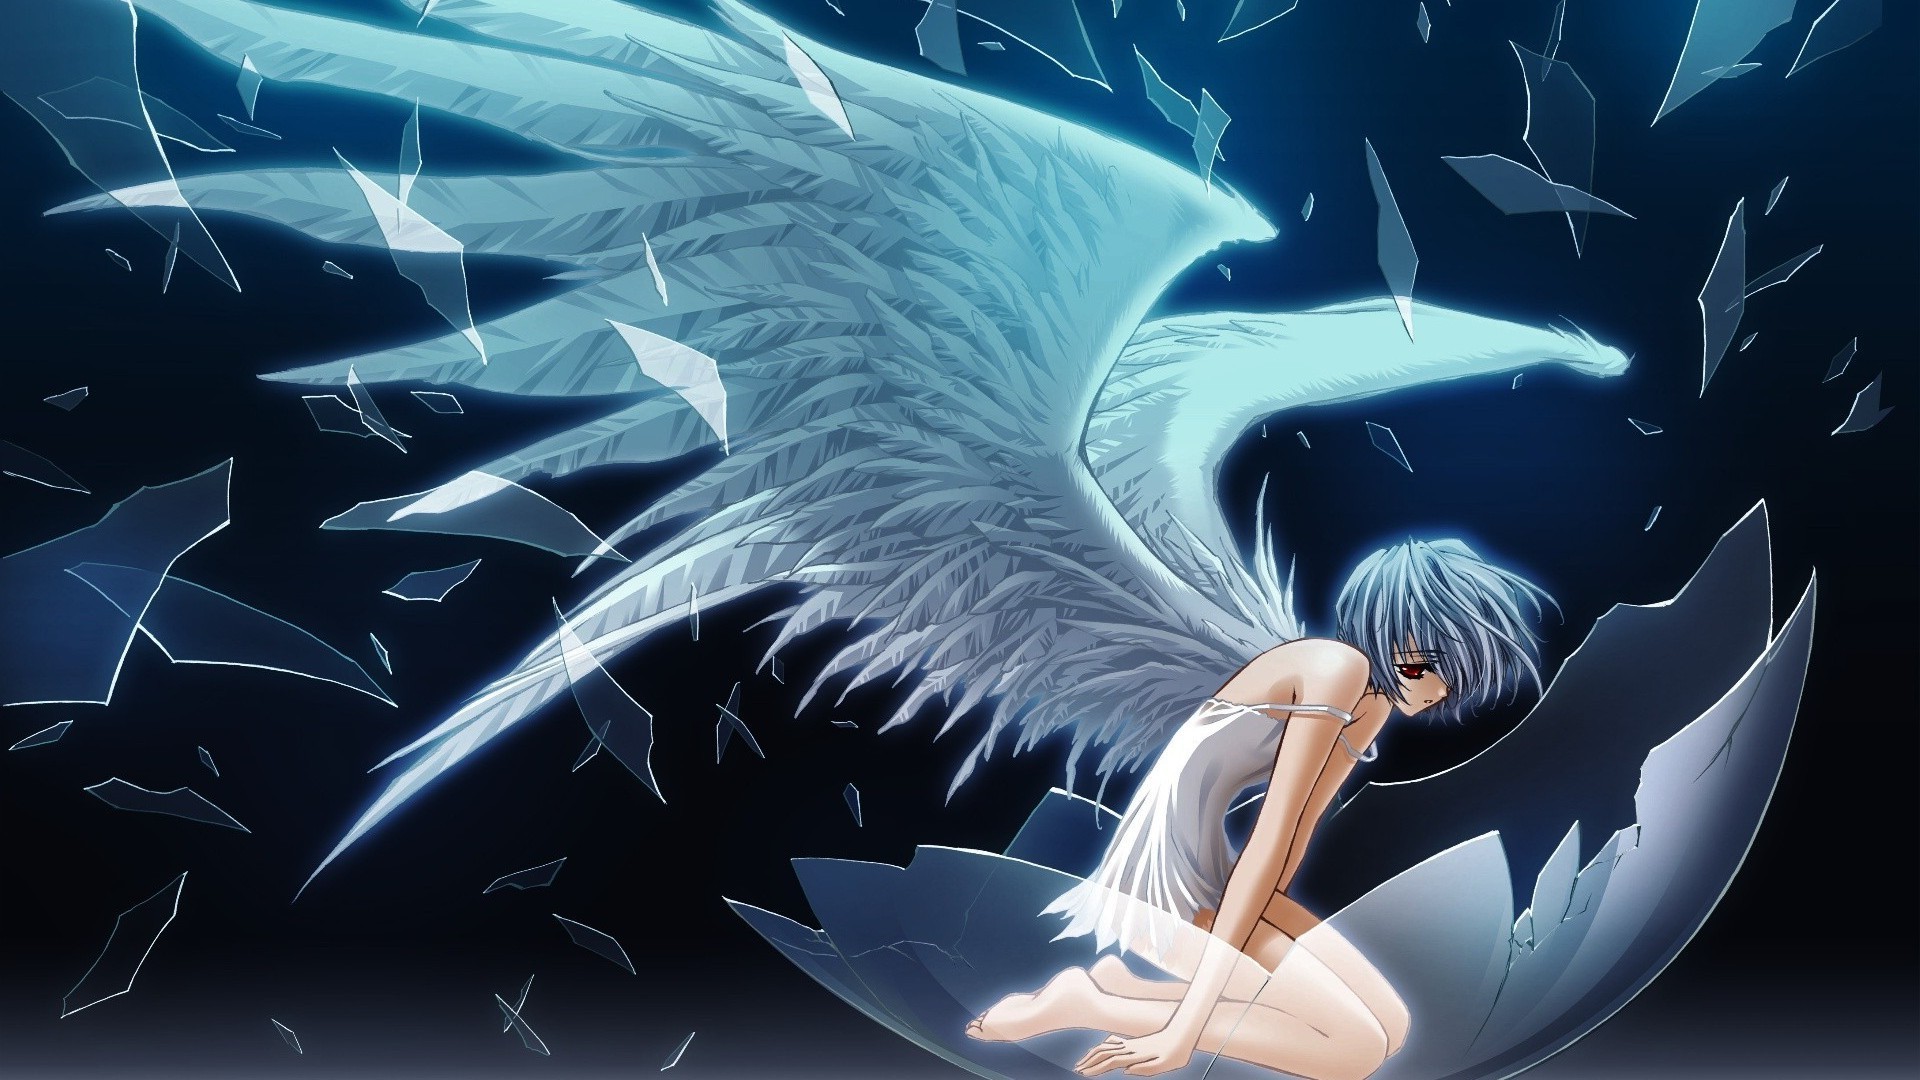 Neon Genesis Evangelion Ayanami Rei Anime Wings Wallpapers Hd Desktop And Mobile Backgrounds